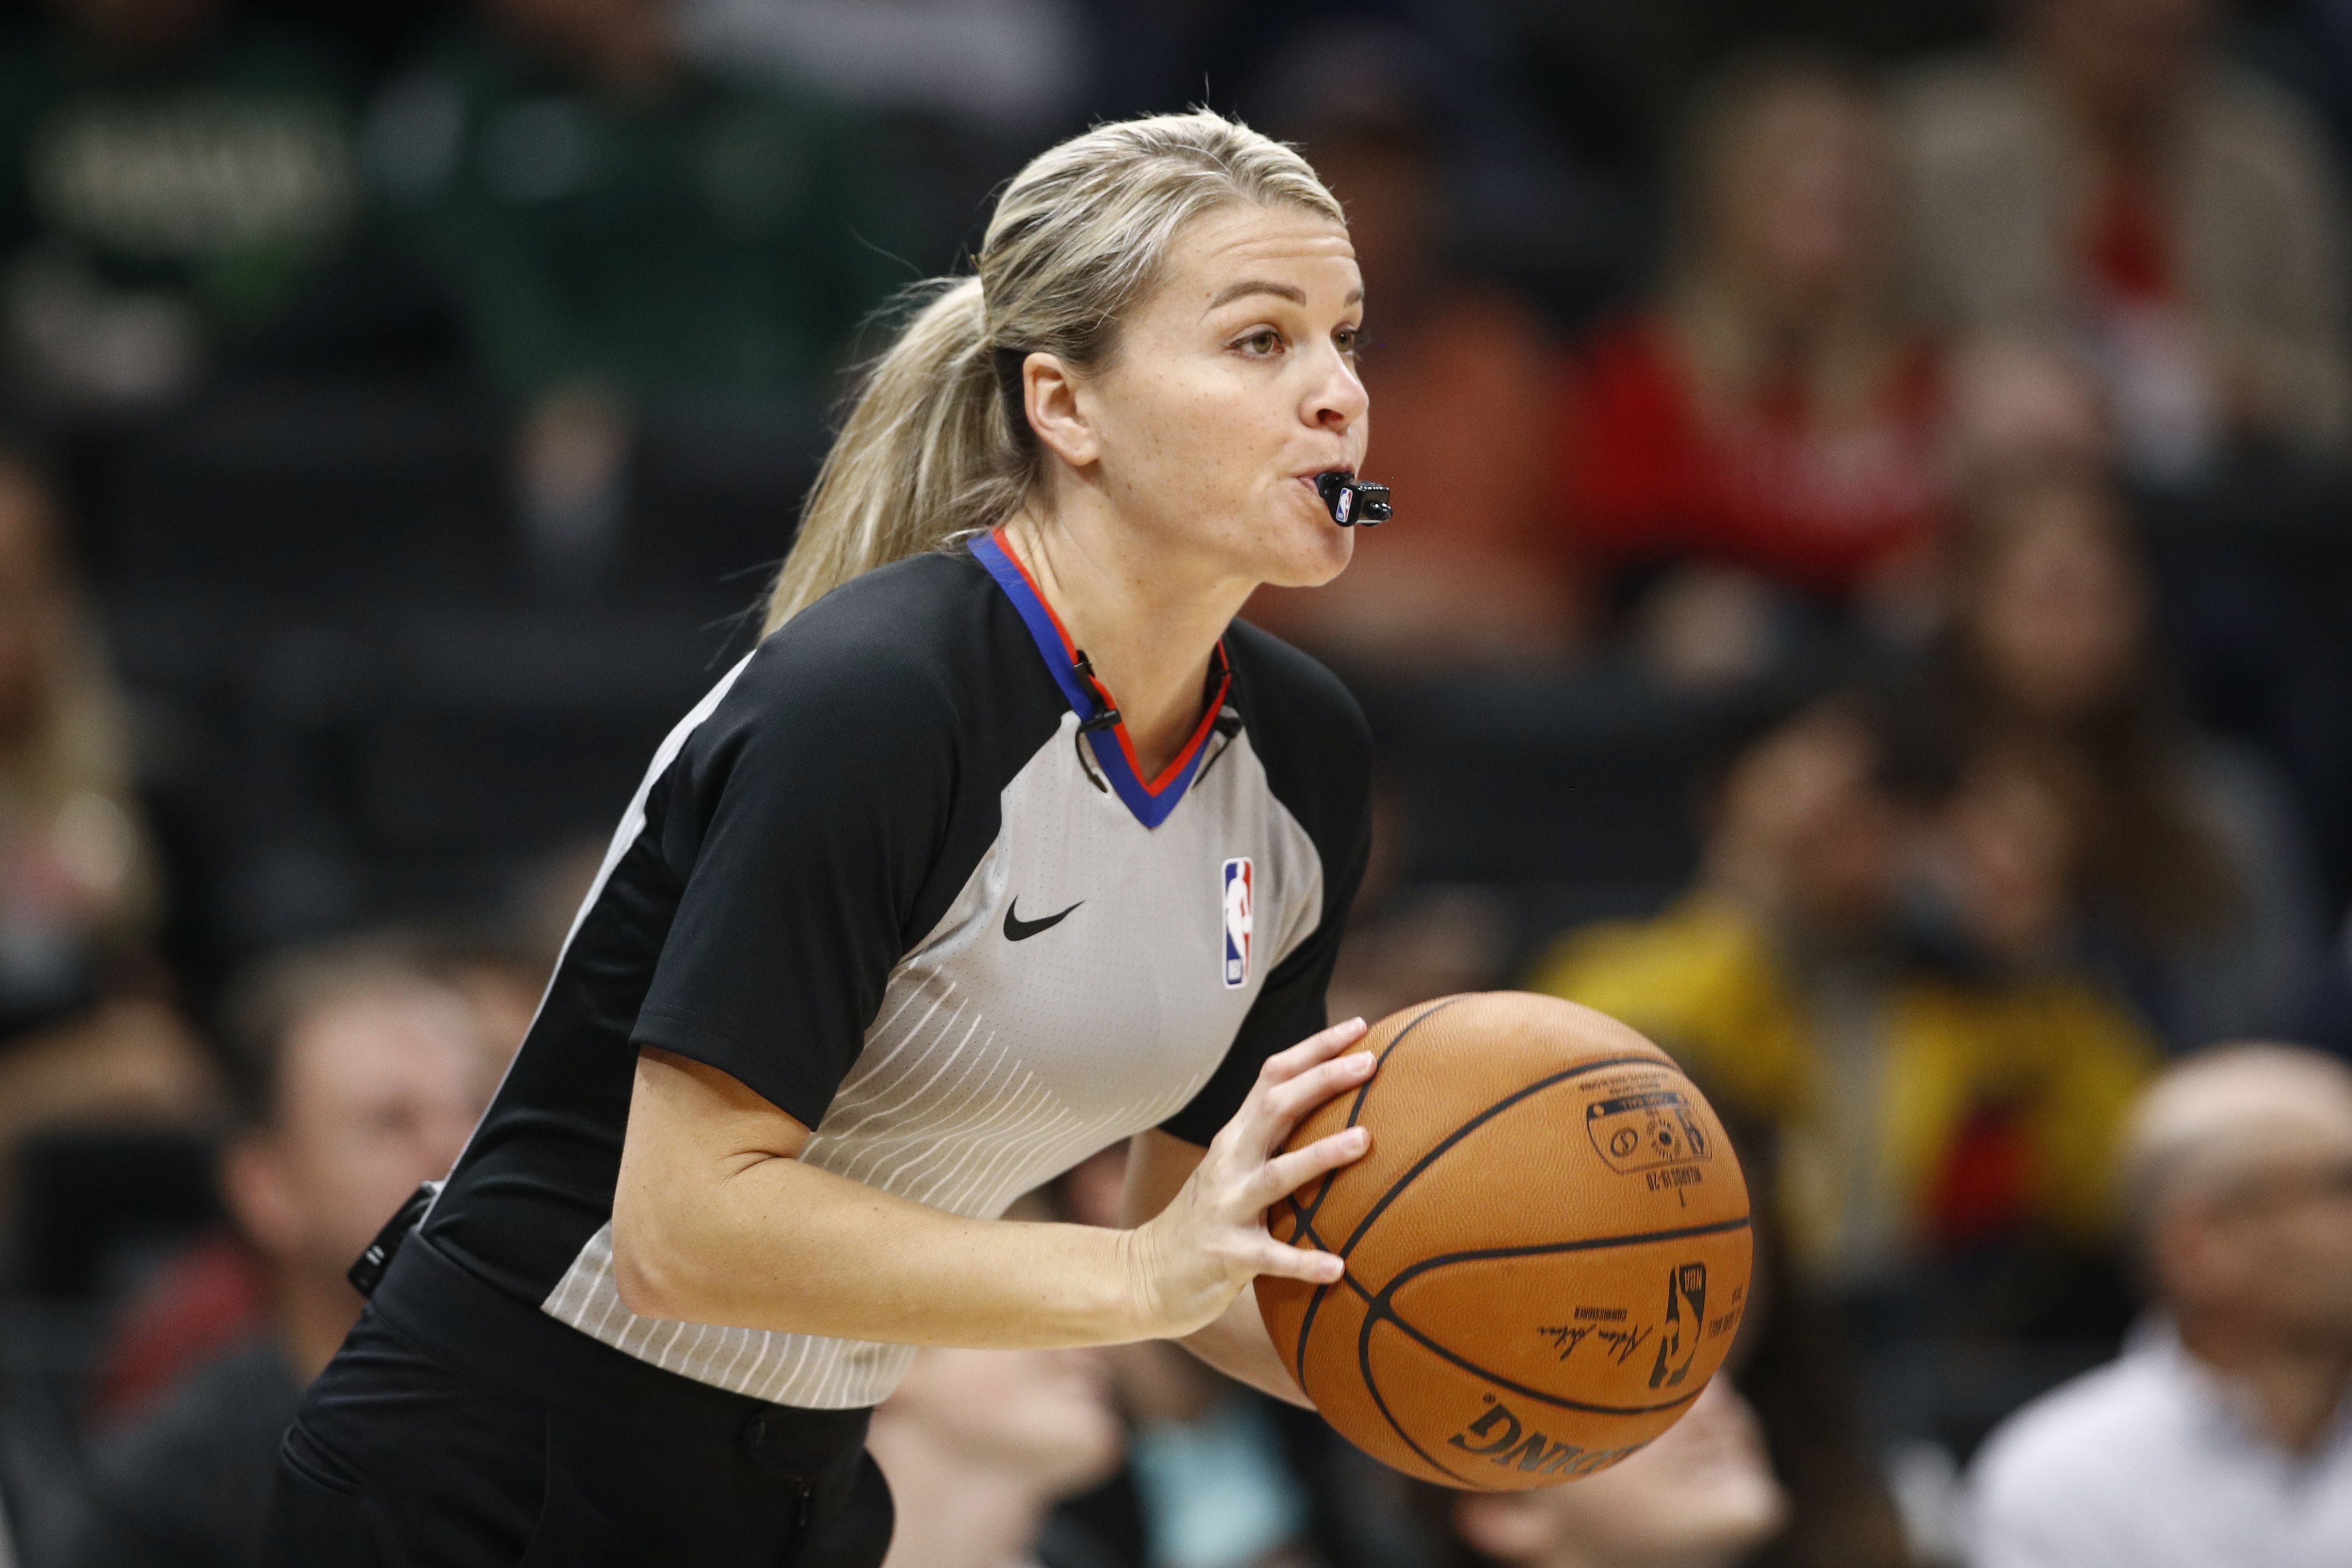 Female referees in the NBA